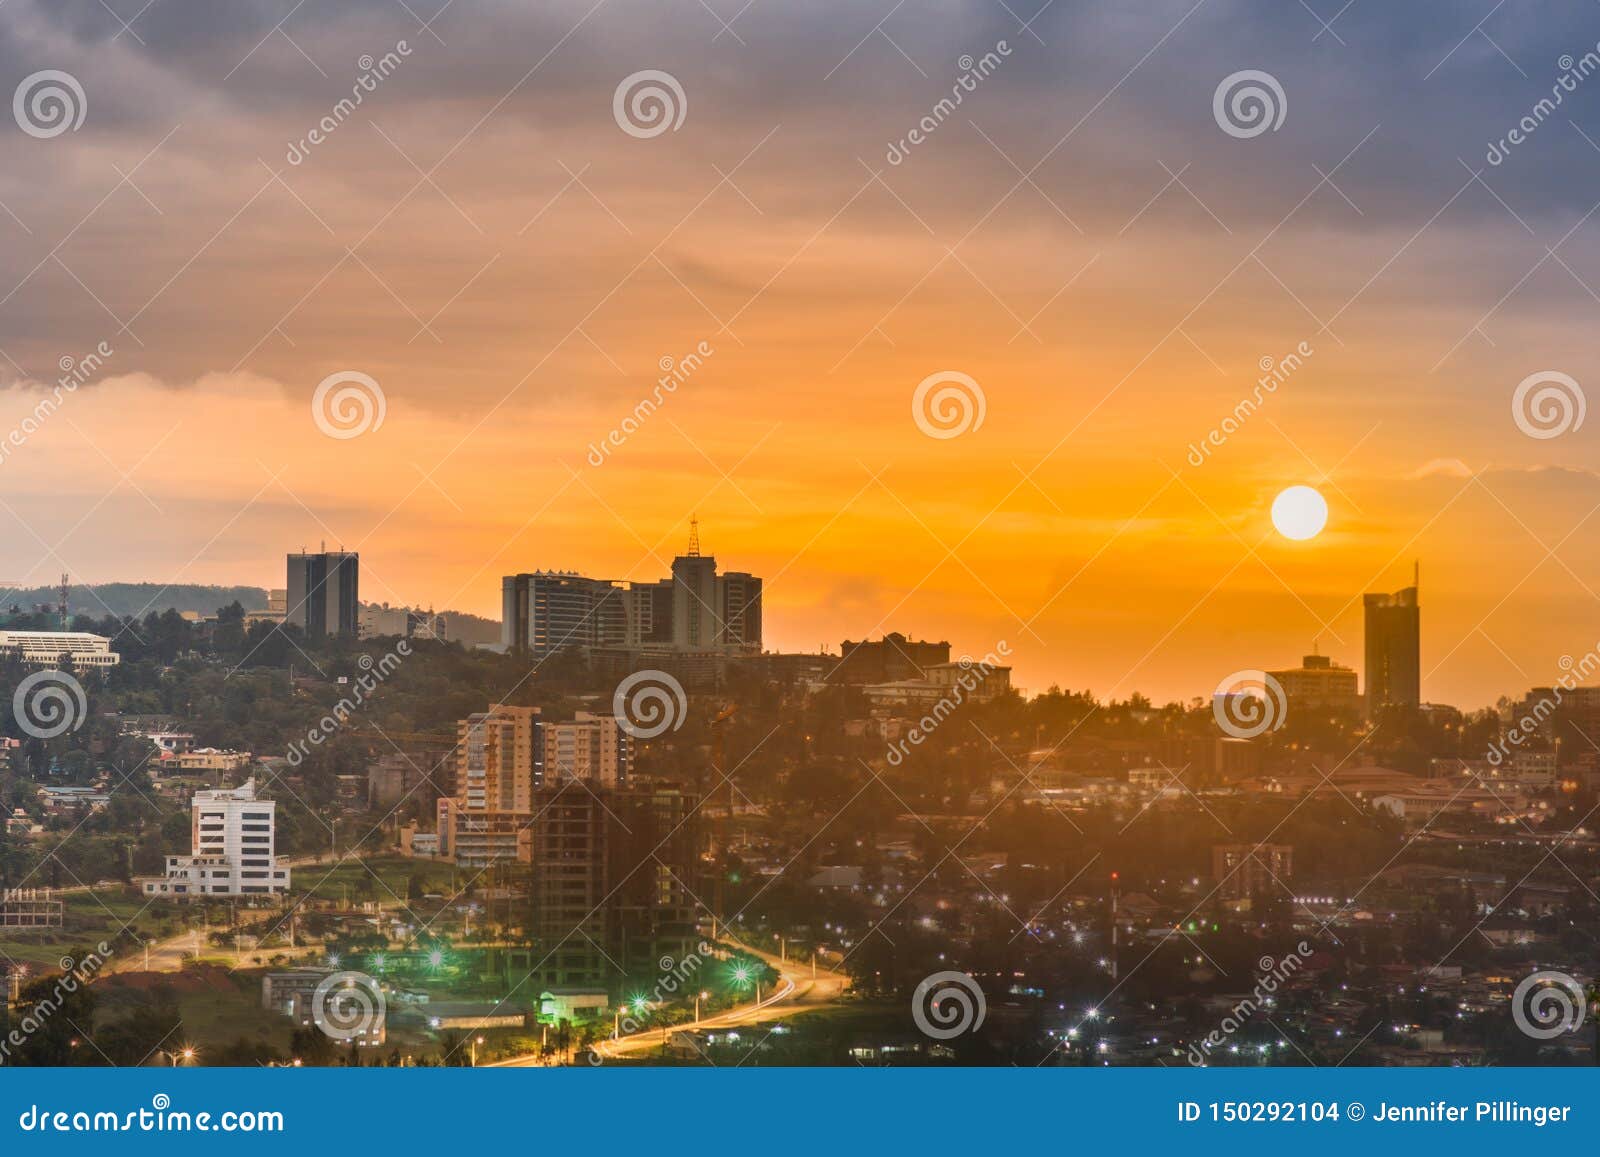 a composite image of kigali city centre skyline and surrounding in daylight, sunset and at night. rwanda